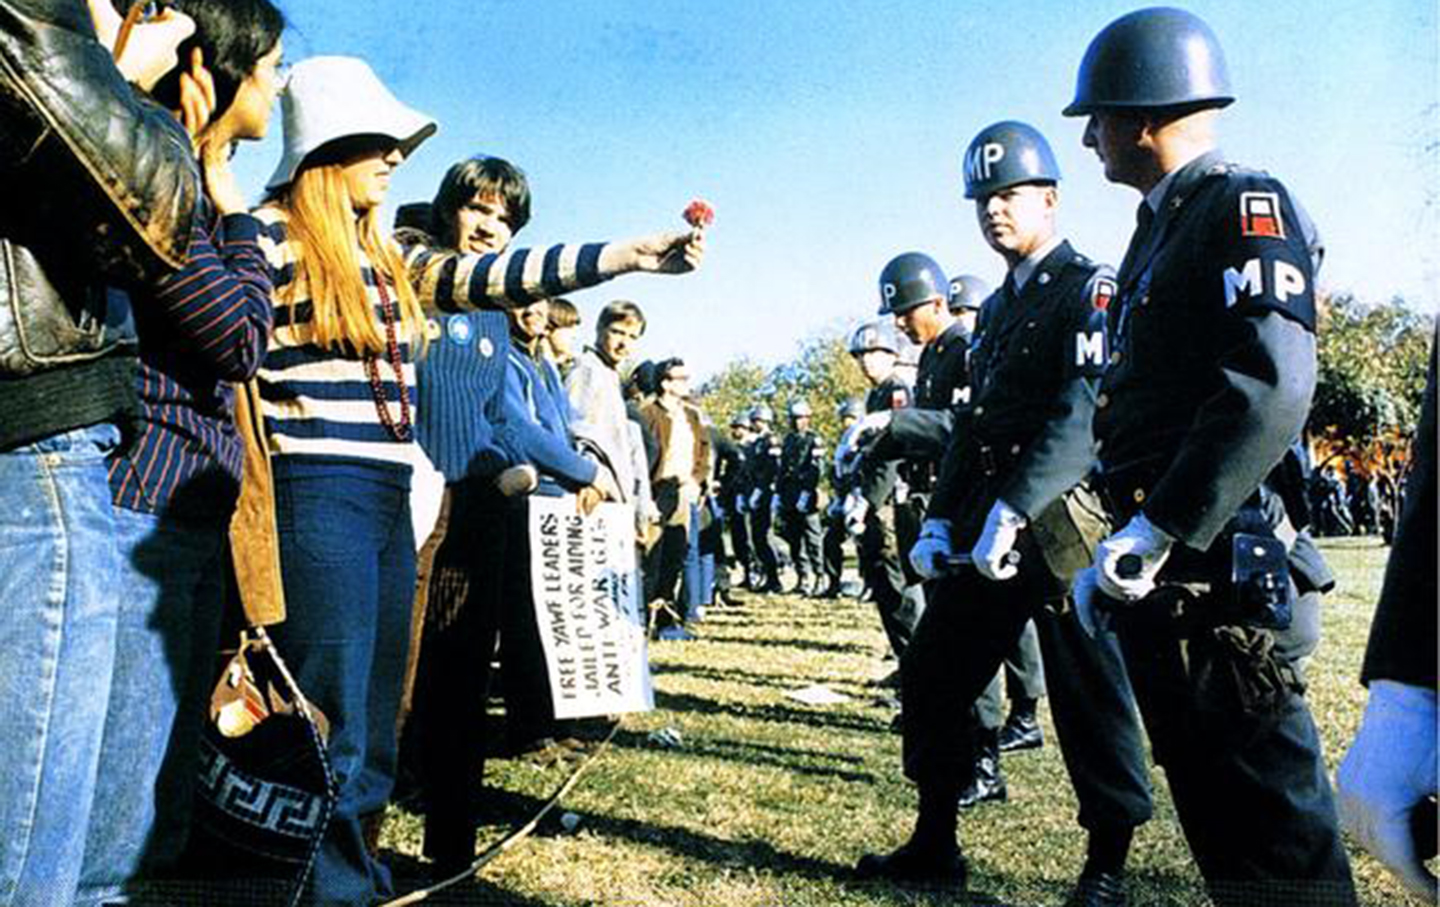 A demonstrator offers a flower to military police at a Vietnam War demonstration at the Pentagon in 1967.